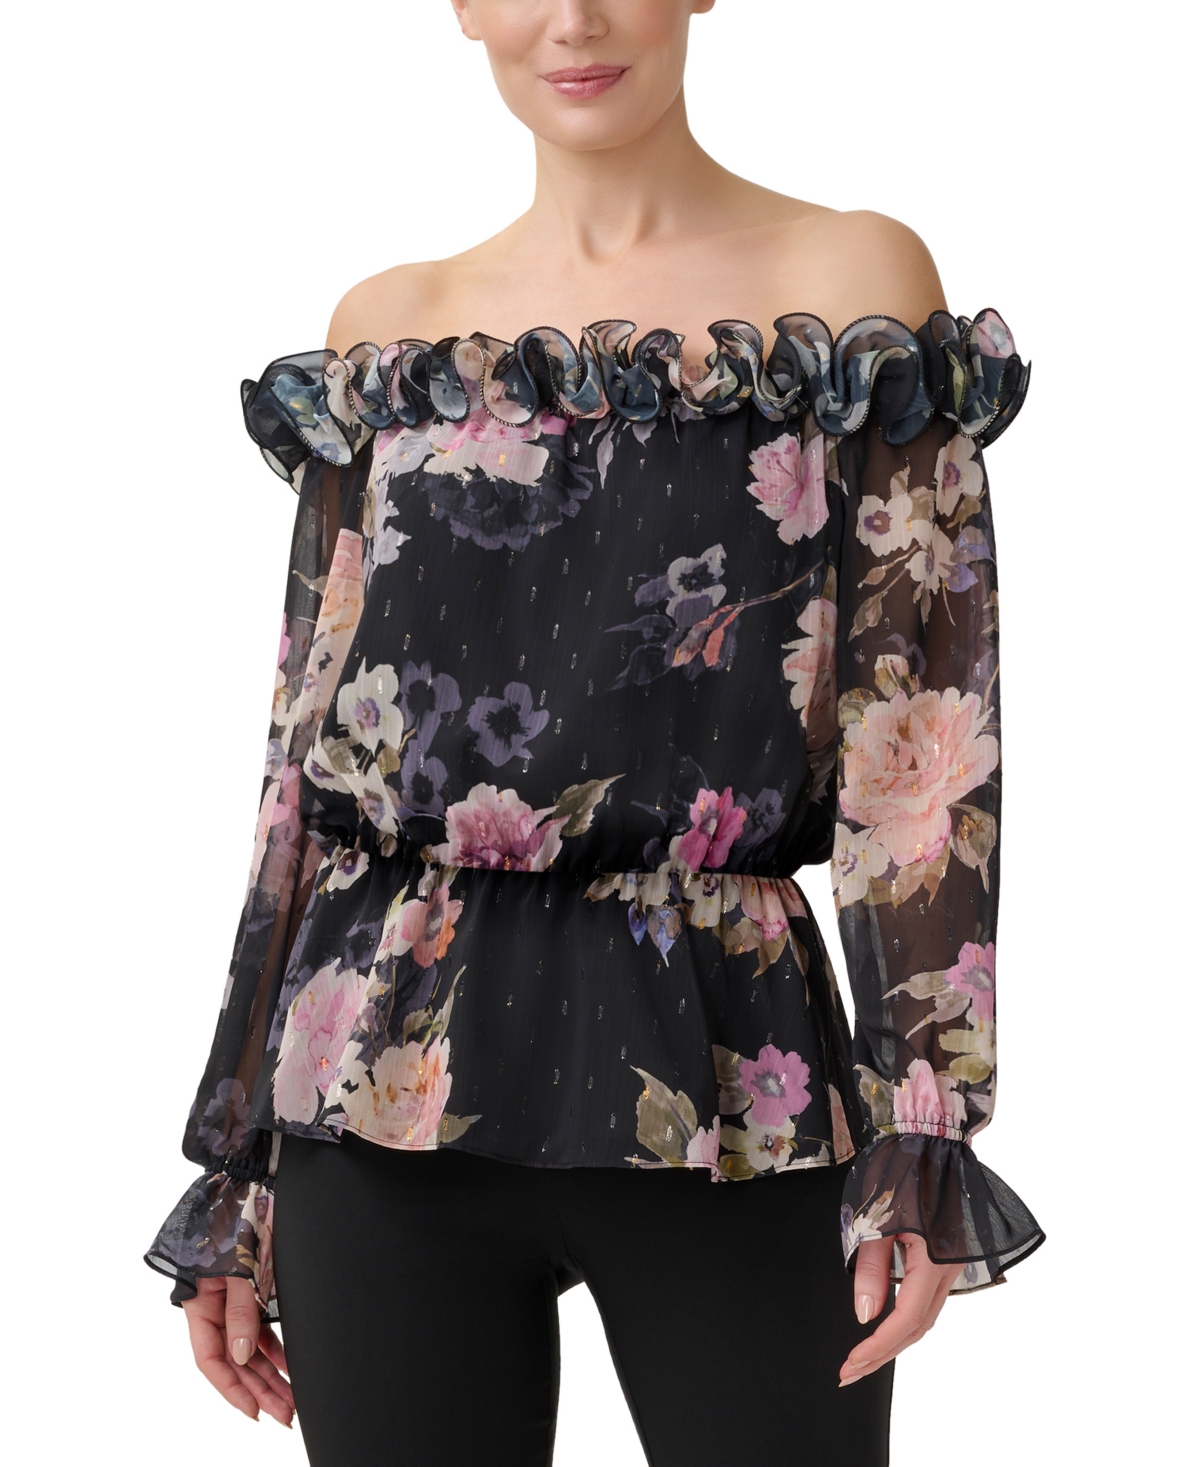  Adrianna Papell Women's Ruffled Off-The-Shoulder Top